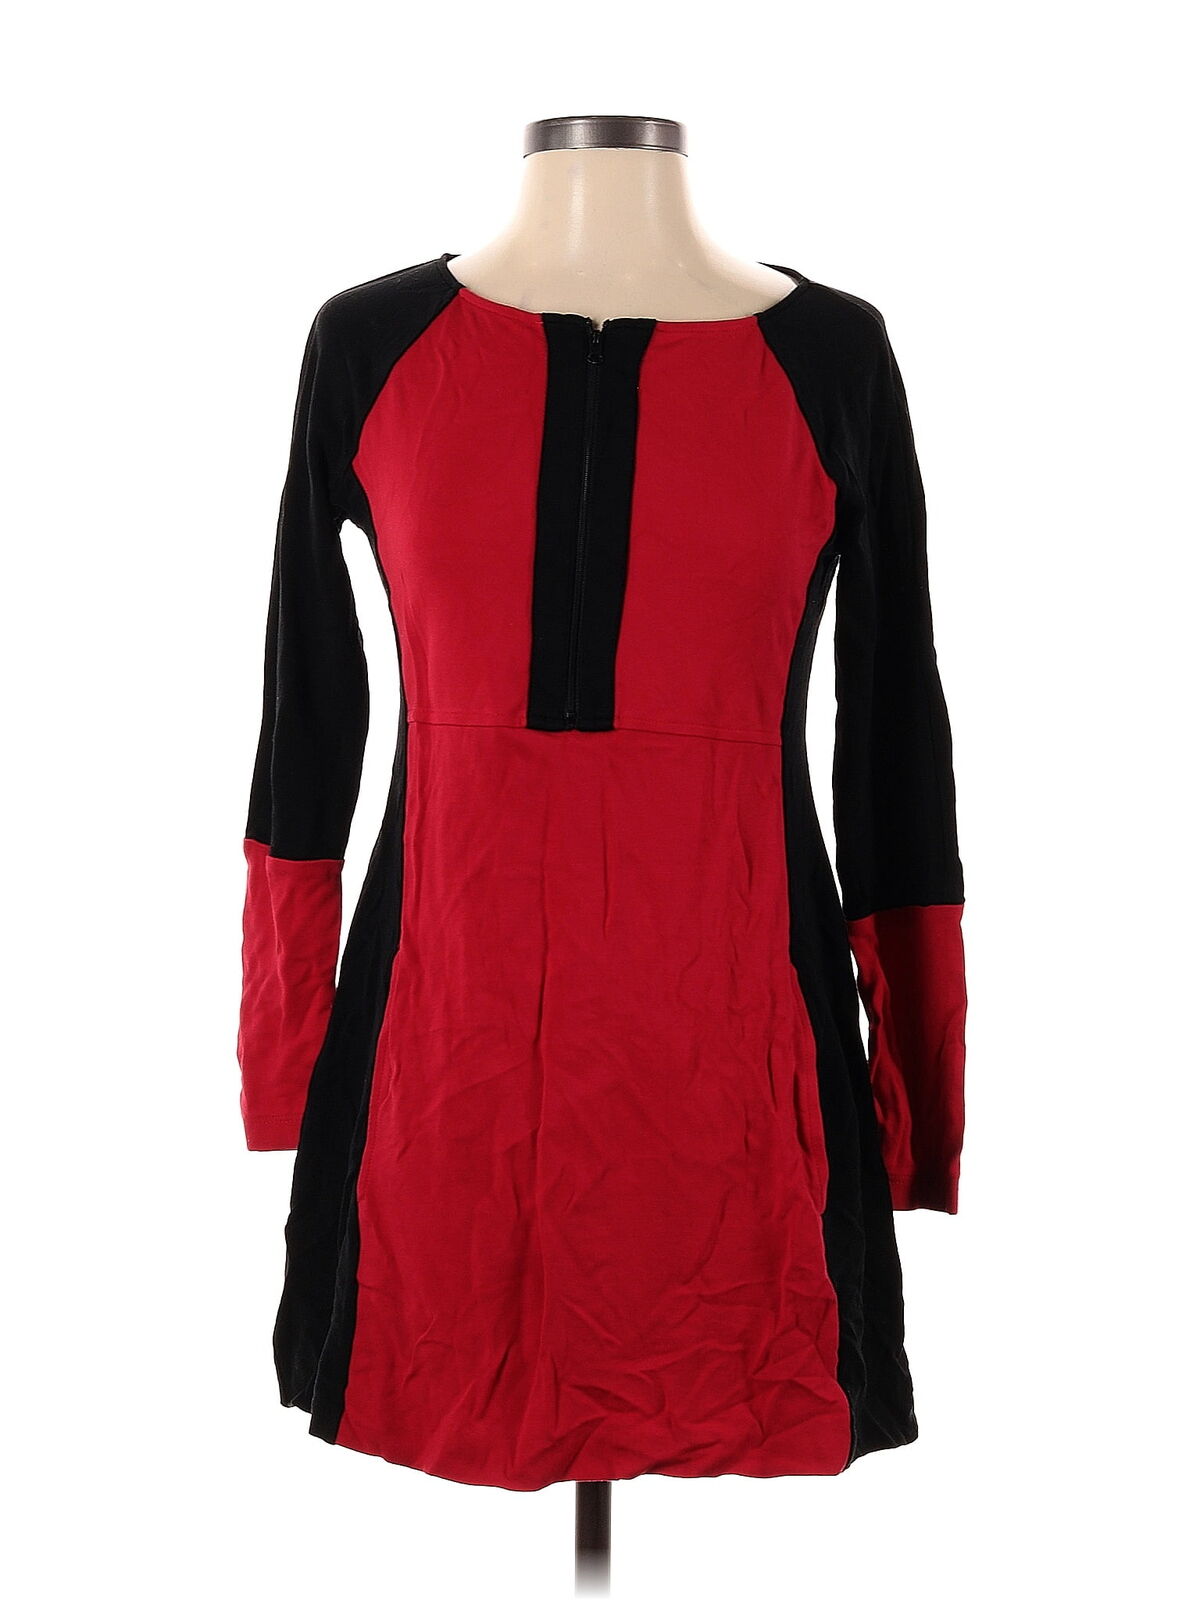 Lynn Ritchie Silver Women Red Casual Dress XS - image 1